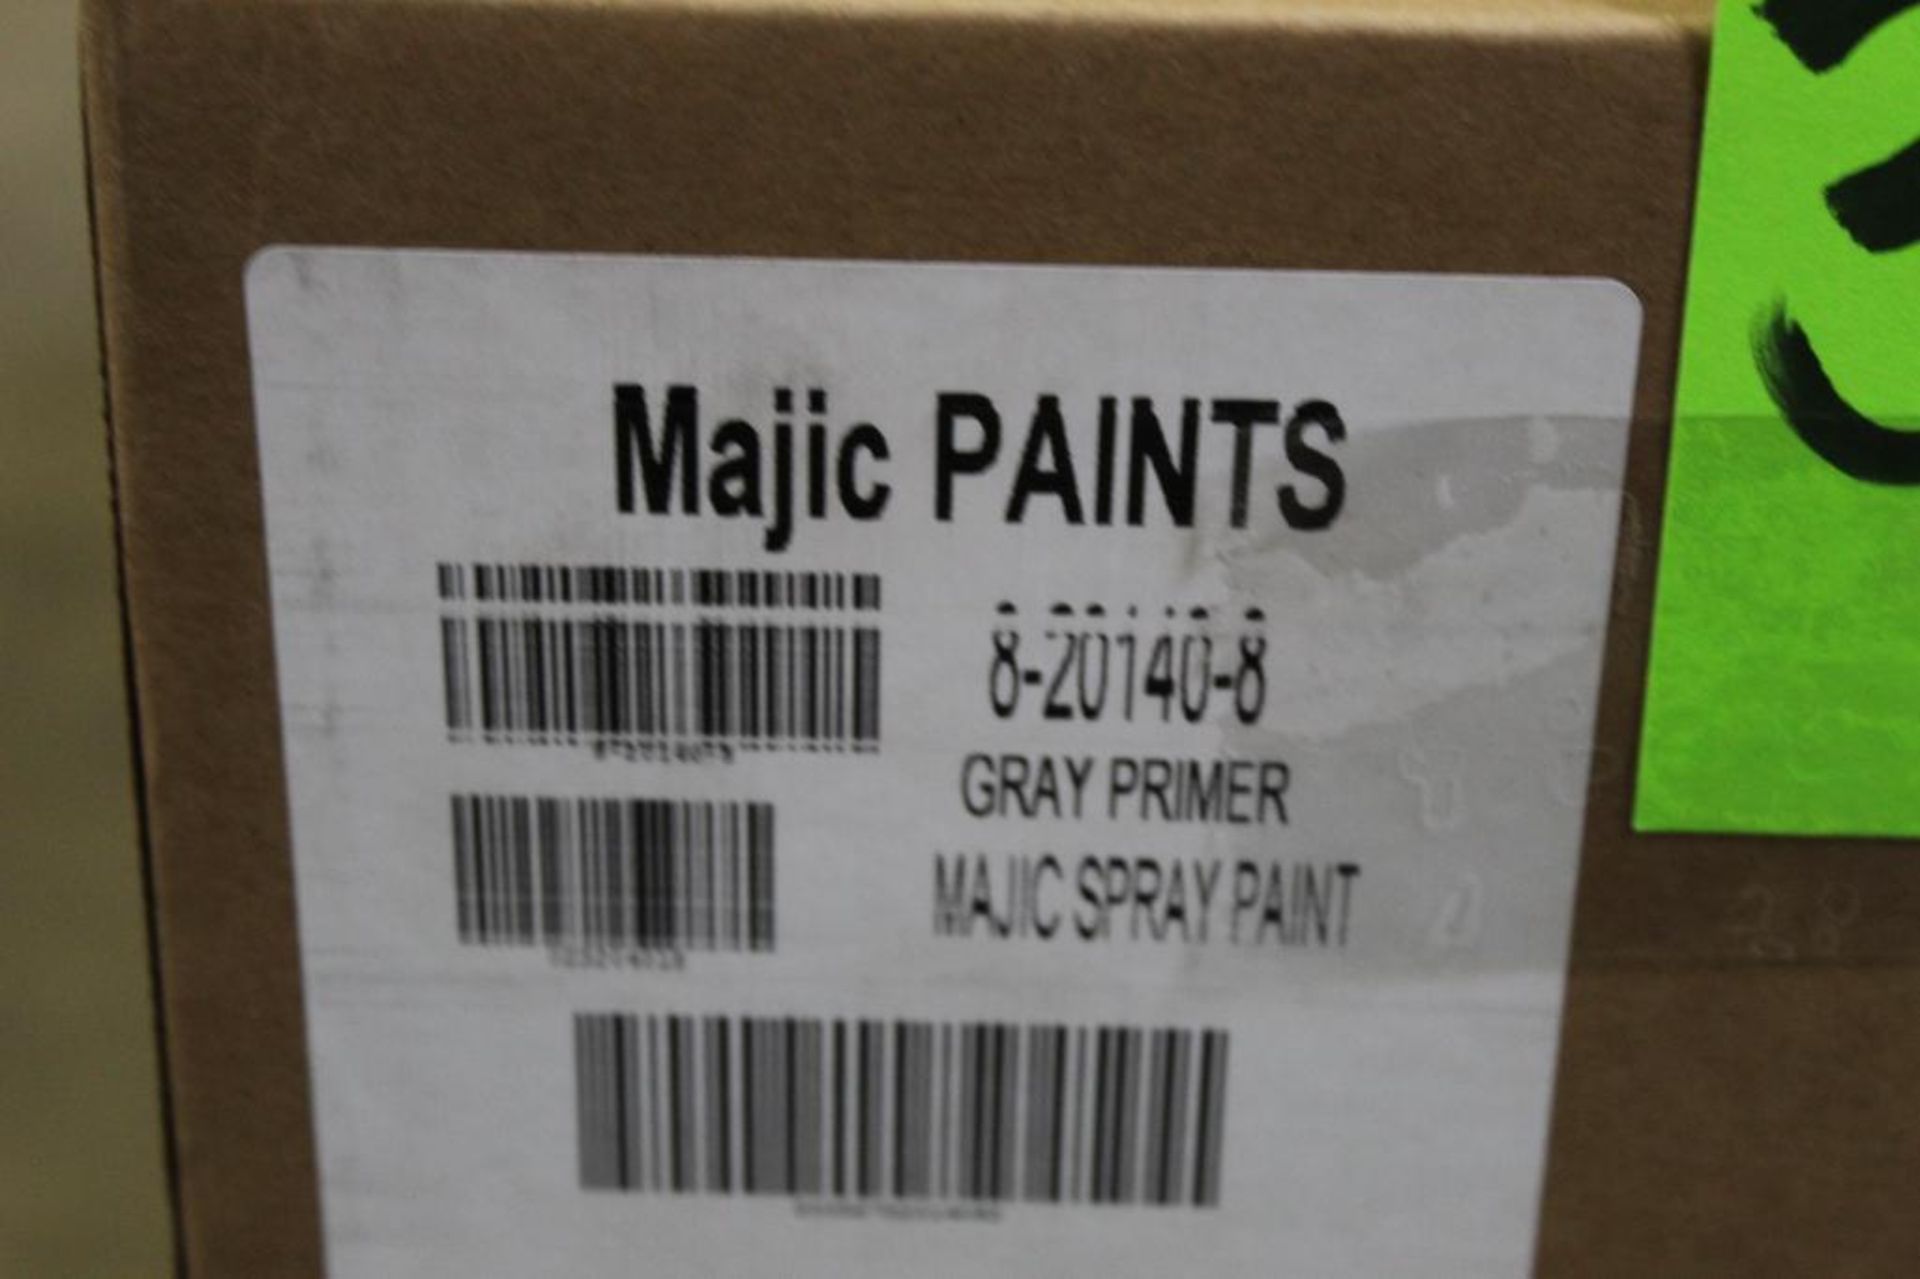 Lot of (12) Cases (6 Per Case) of Mavic Paints Gray Primer Spray Paint Product # 8-20140-8 - Image 3 of 3